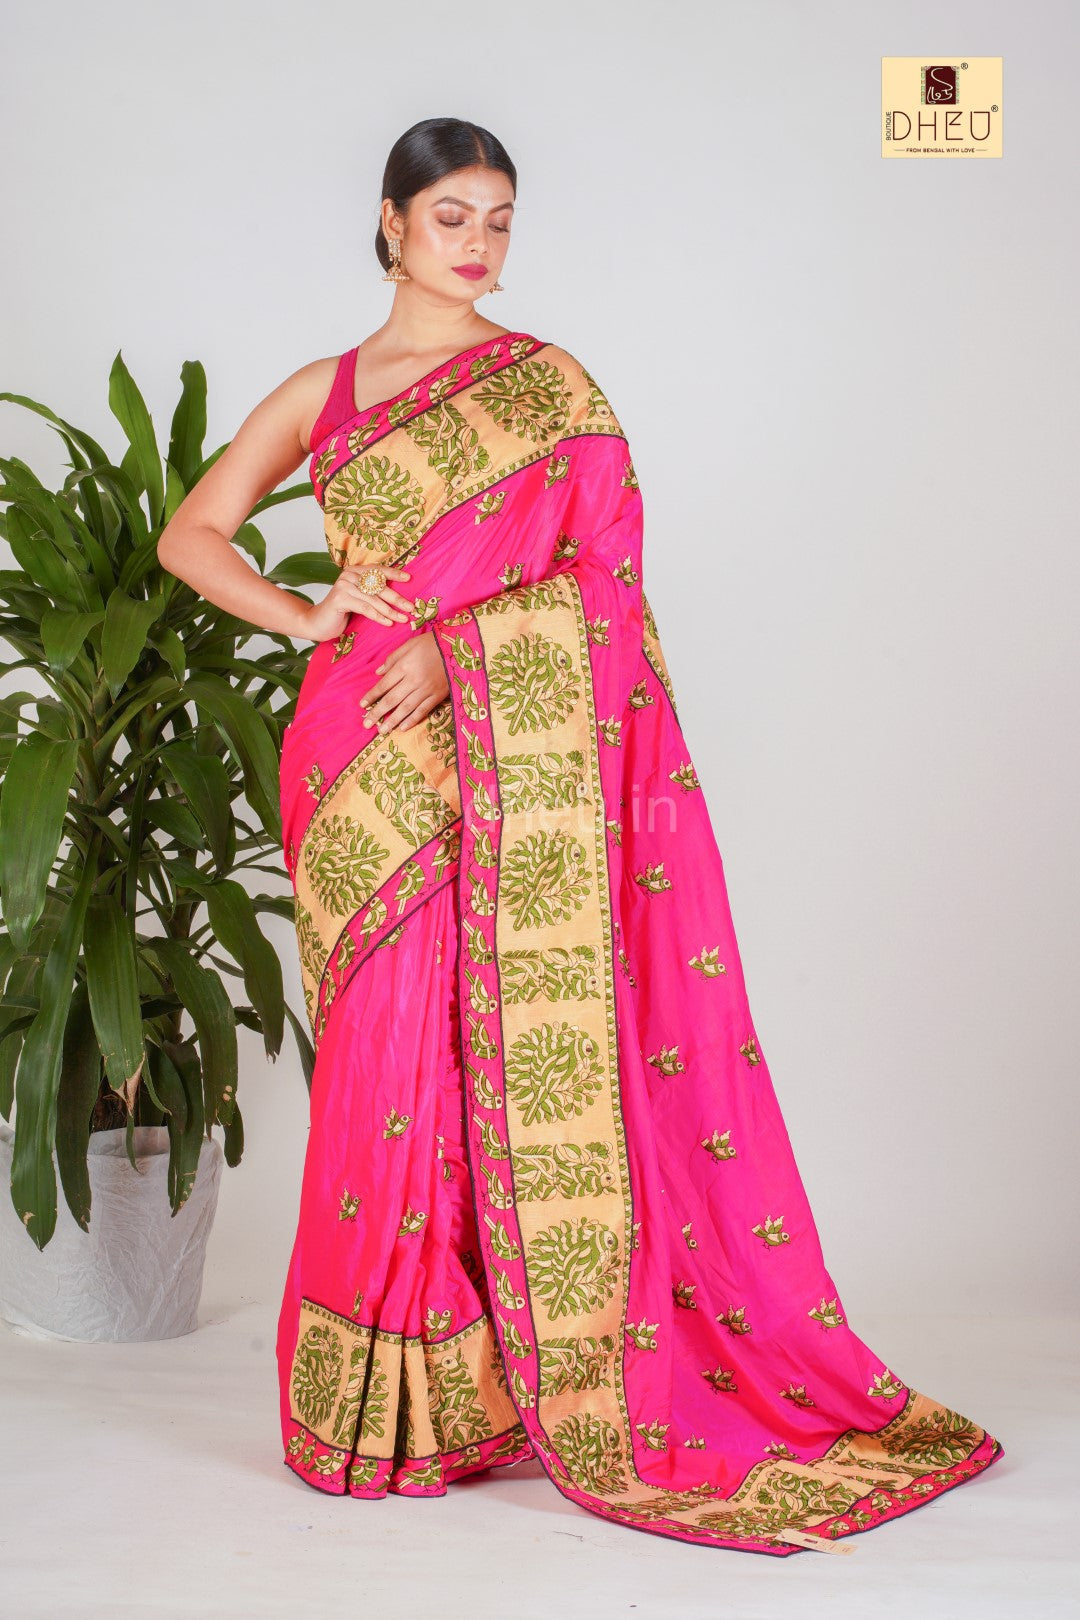 designer embroidery sana silk saree at lowest price only at dheu.in